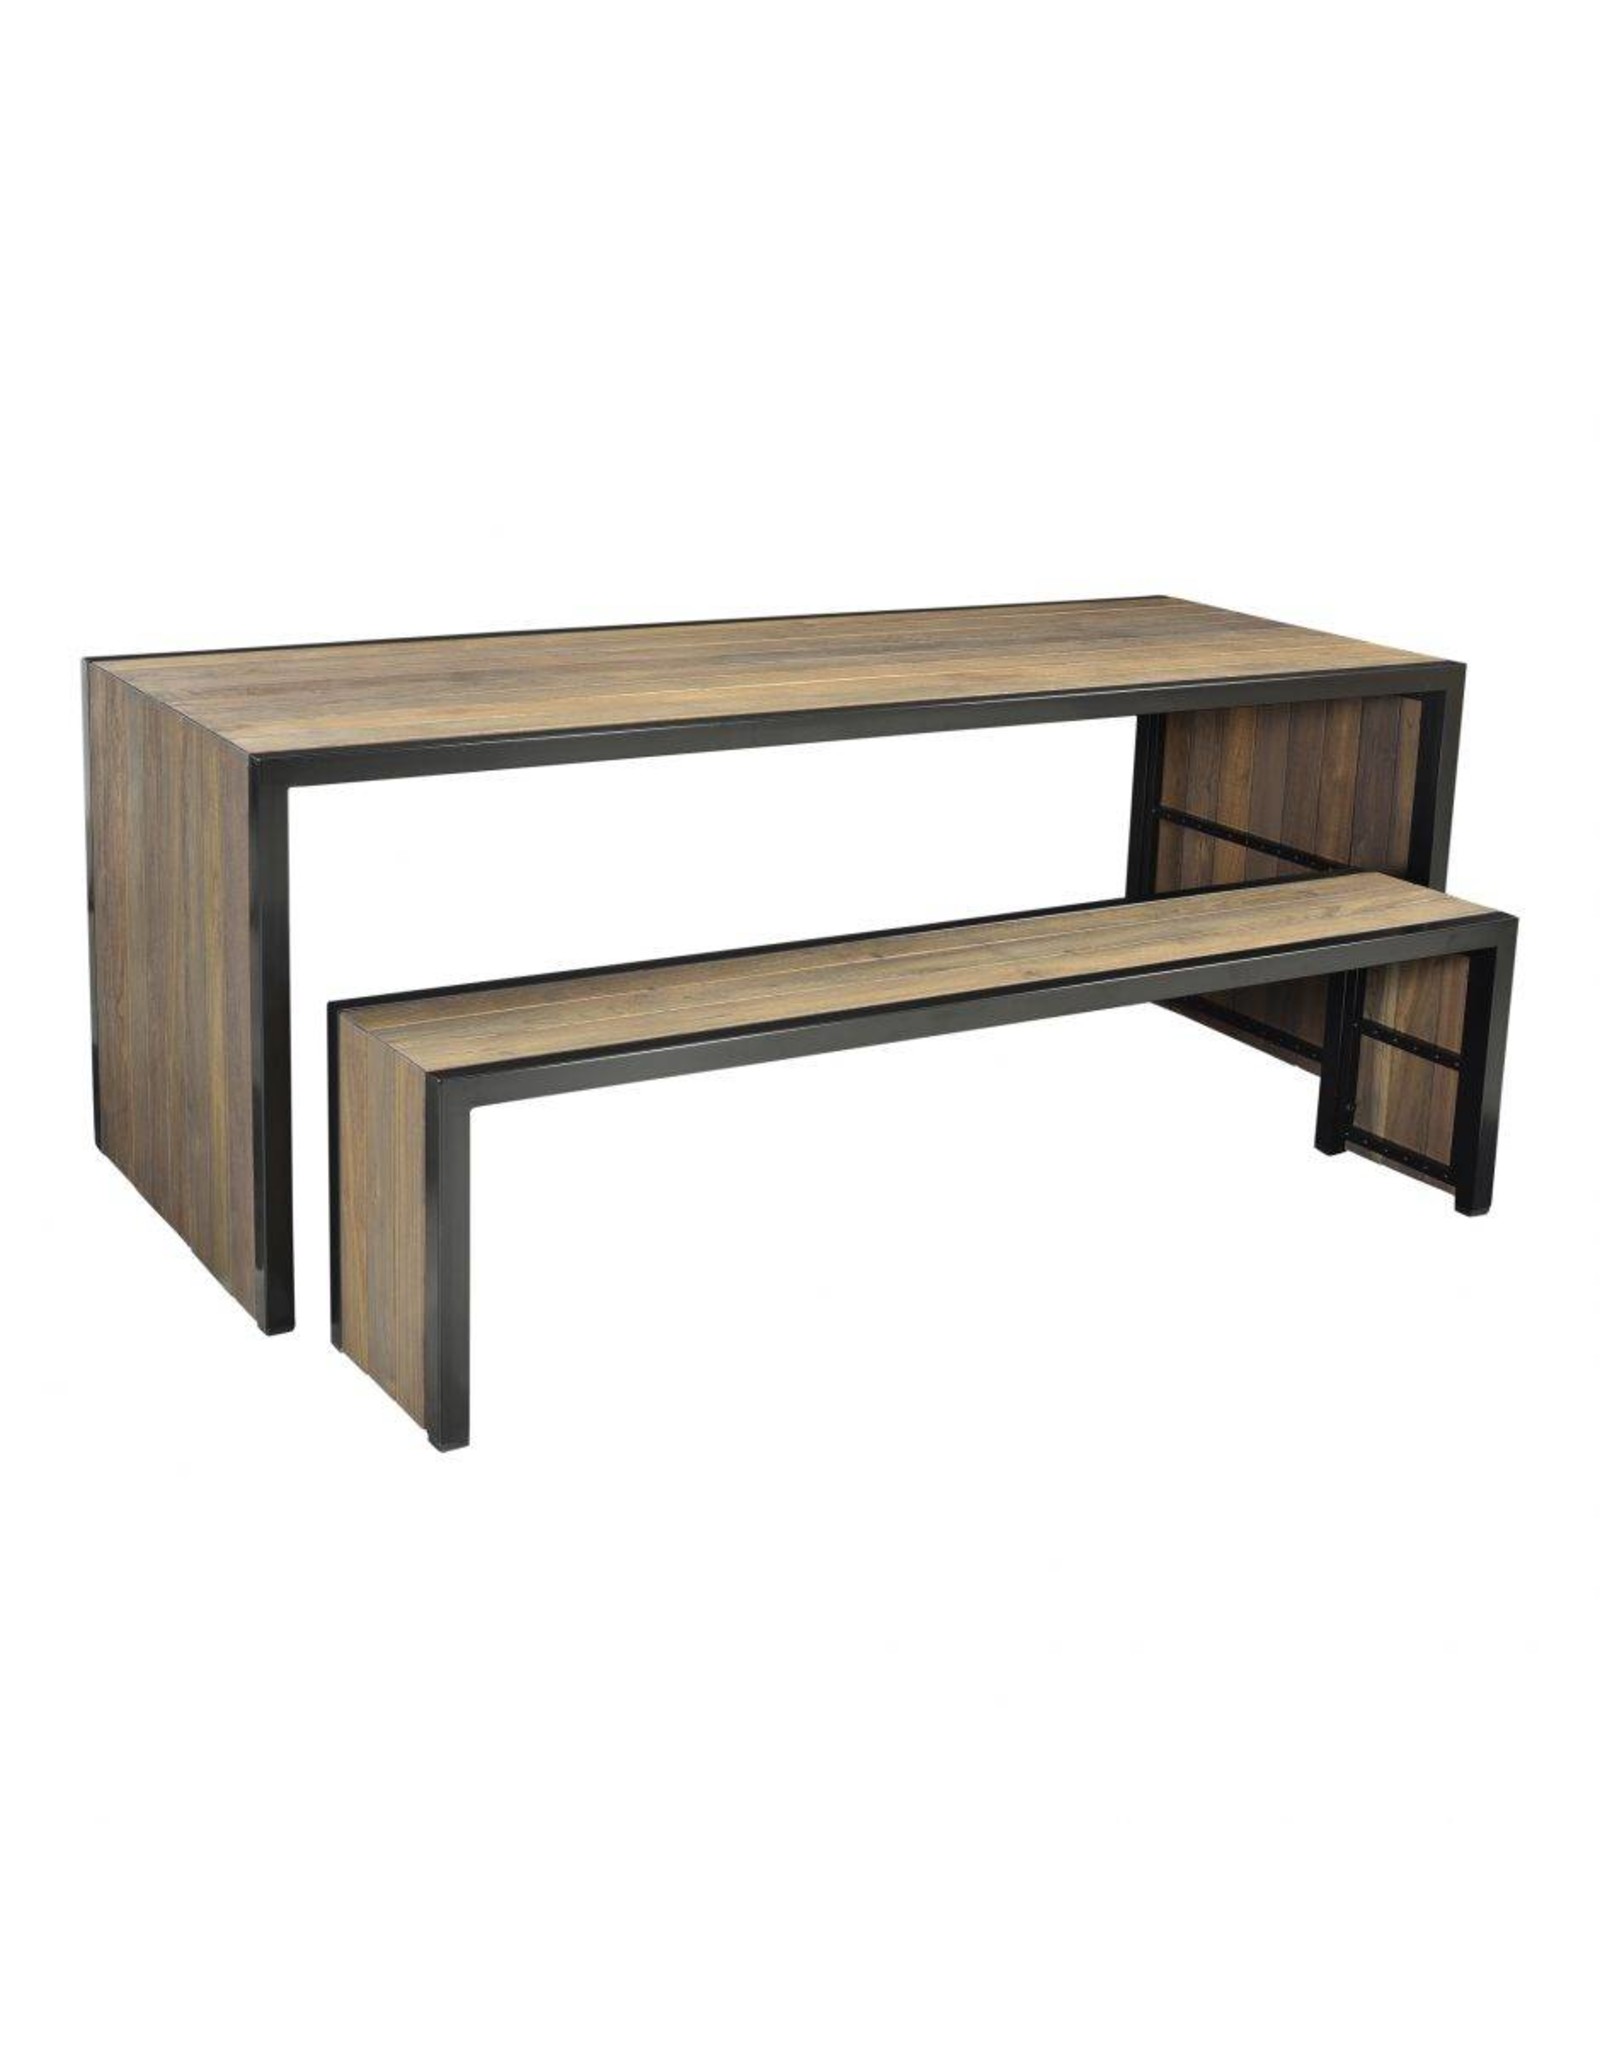 Monroe & Kent ISABELLA DINING TABLE COCOA